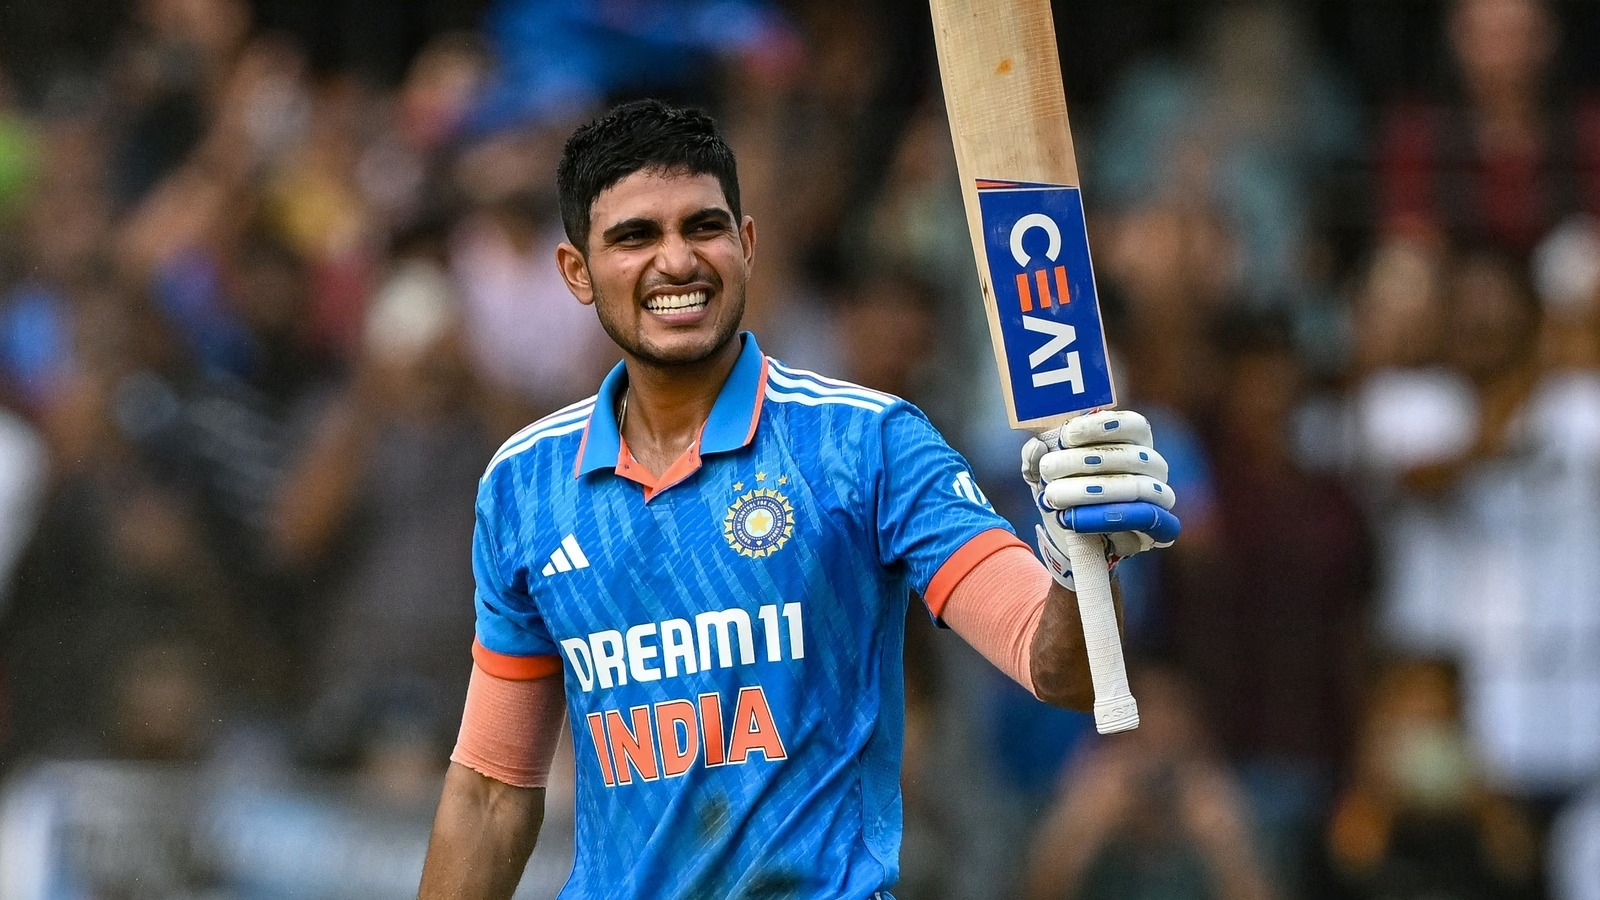 Shubman Gill Within Touching Distance Of Babar Azam In Latest Odi Rankings But Pak Captain To Begin World Cup As No.1